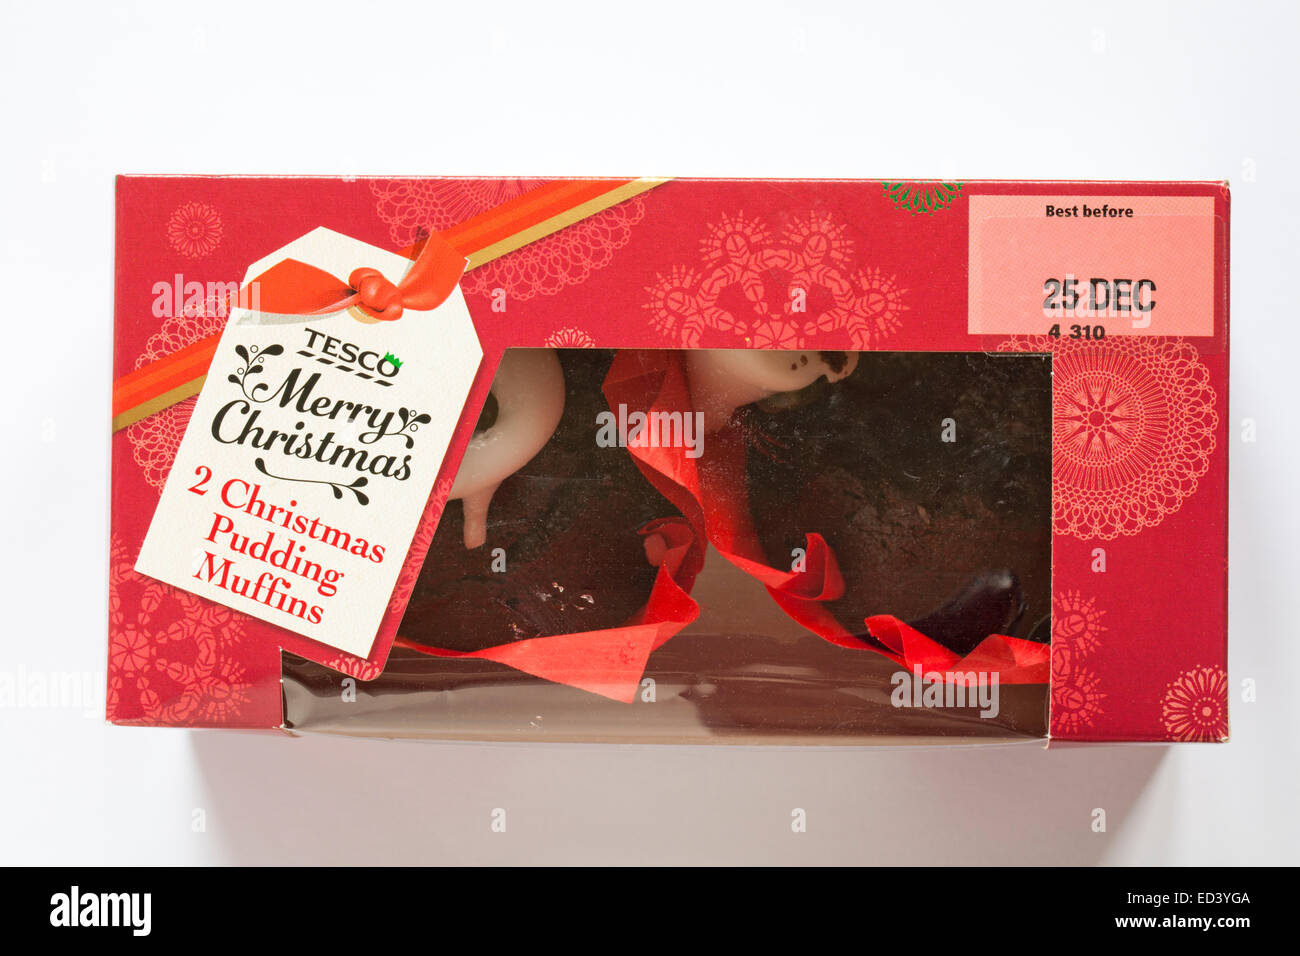 box of Tesco Merry Christmas 2 Christmas Pudding Muffins isolated on white background Stock Photo